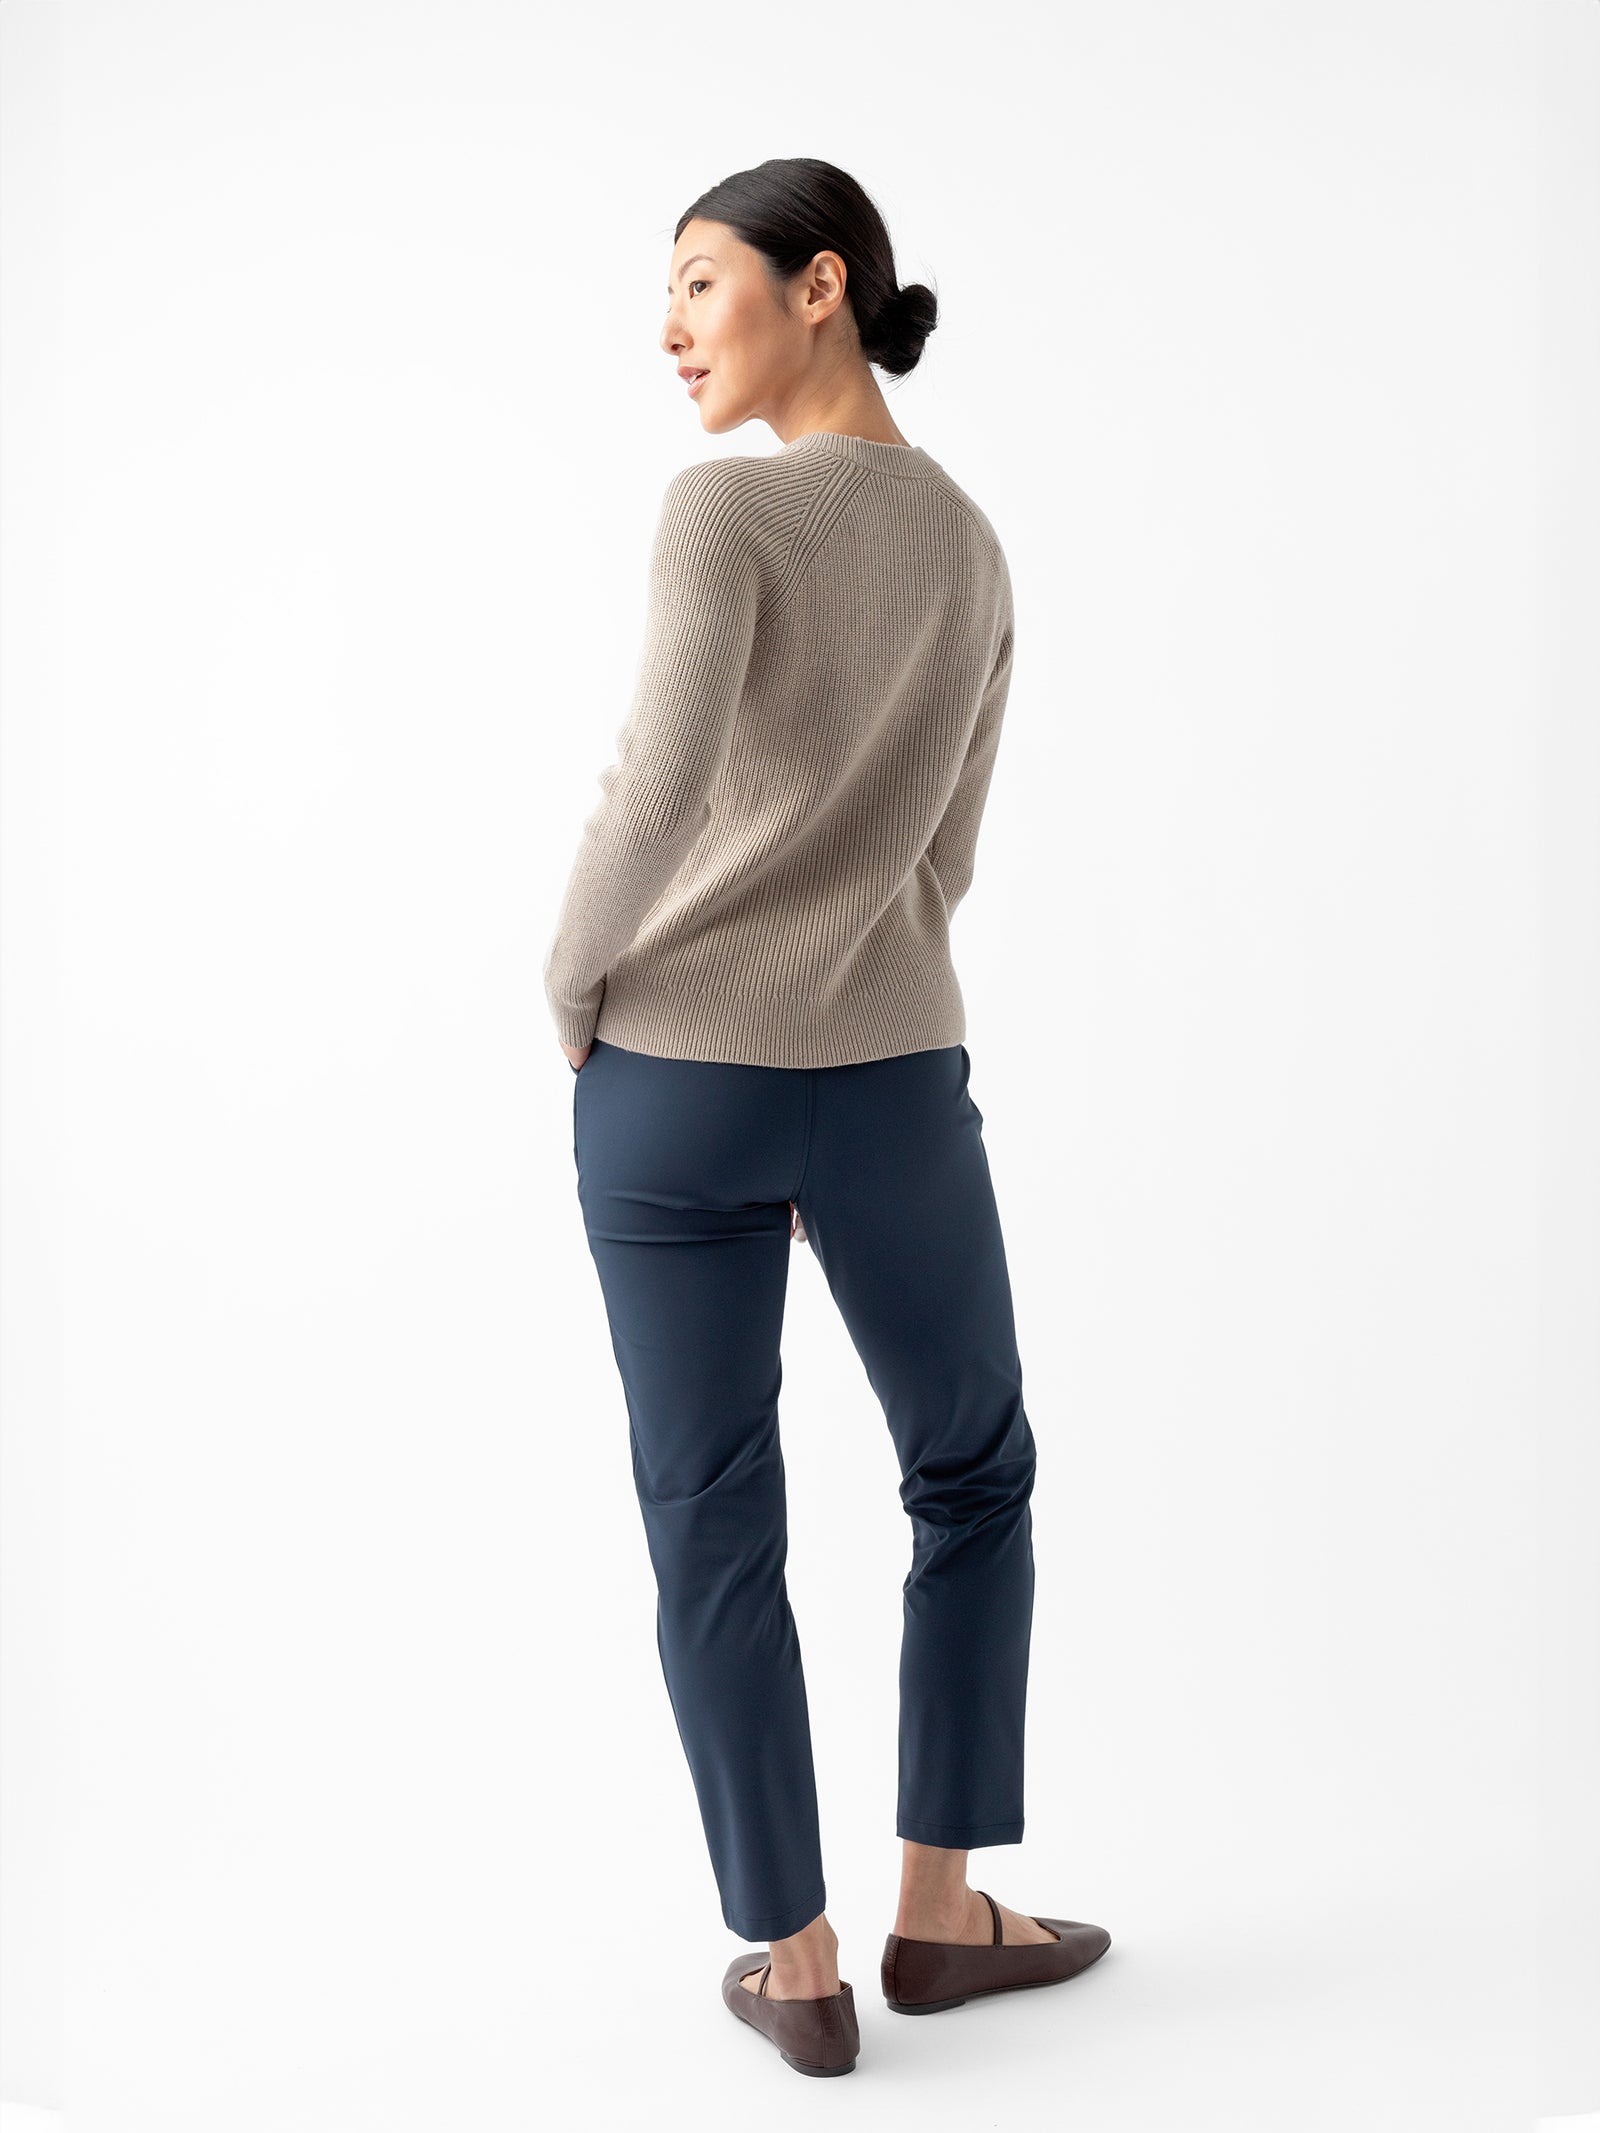 A person is standing against a white background, facing slightly to the side. They are wearing Cozy Earth's Women's Classic Crewneck in beige, dark blue pants, and brown shoes. Their hands are tucked into their pants' pockets, and their dark hair is pulled back in a low bun. 